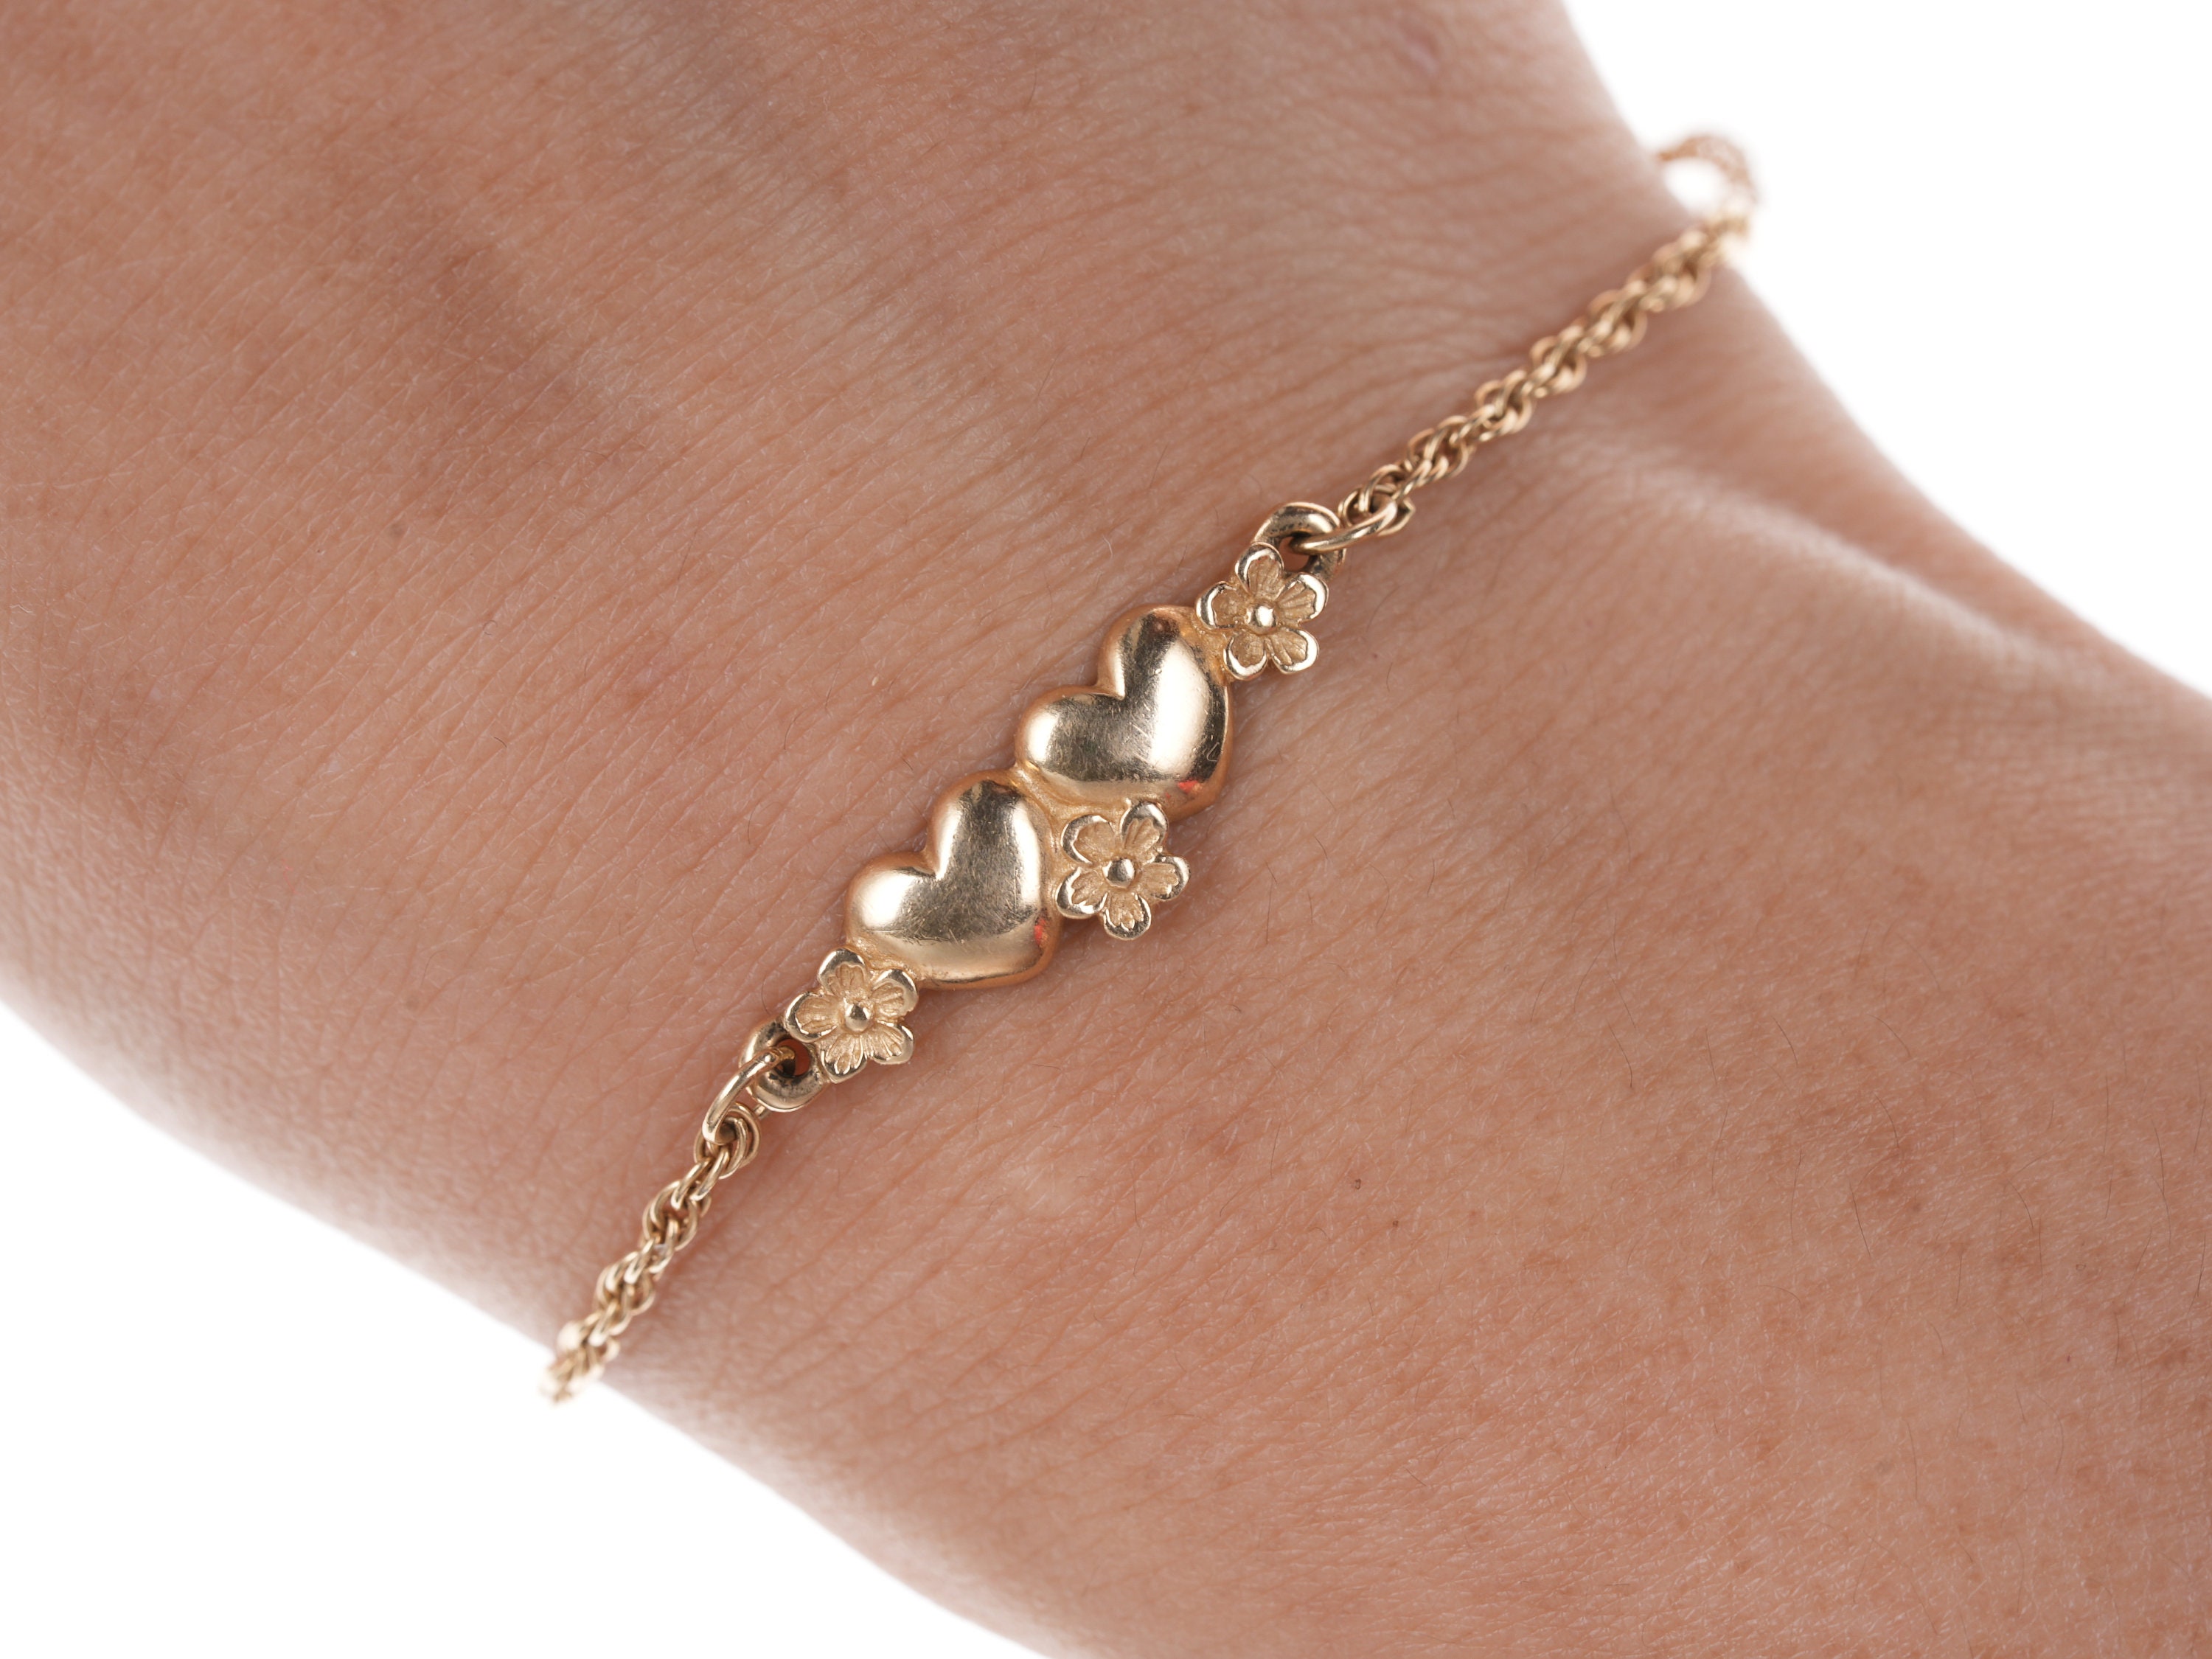 James Avery Sterling Silver Connected Hearts Charm Bracelet | Dillard's | James  avery charm bracelet, James avery charms, James avery bracelet